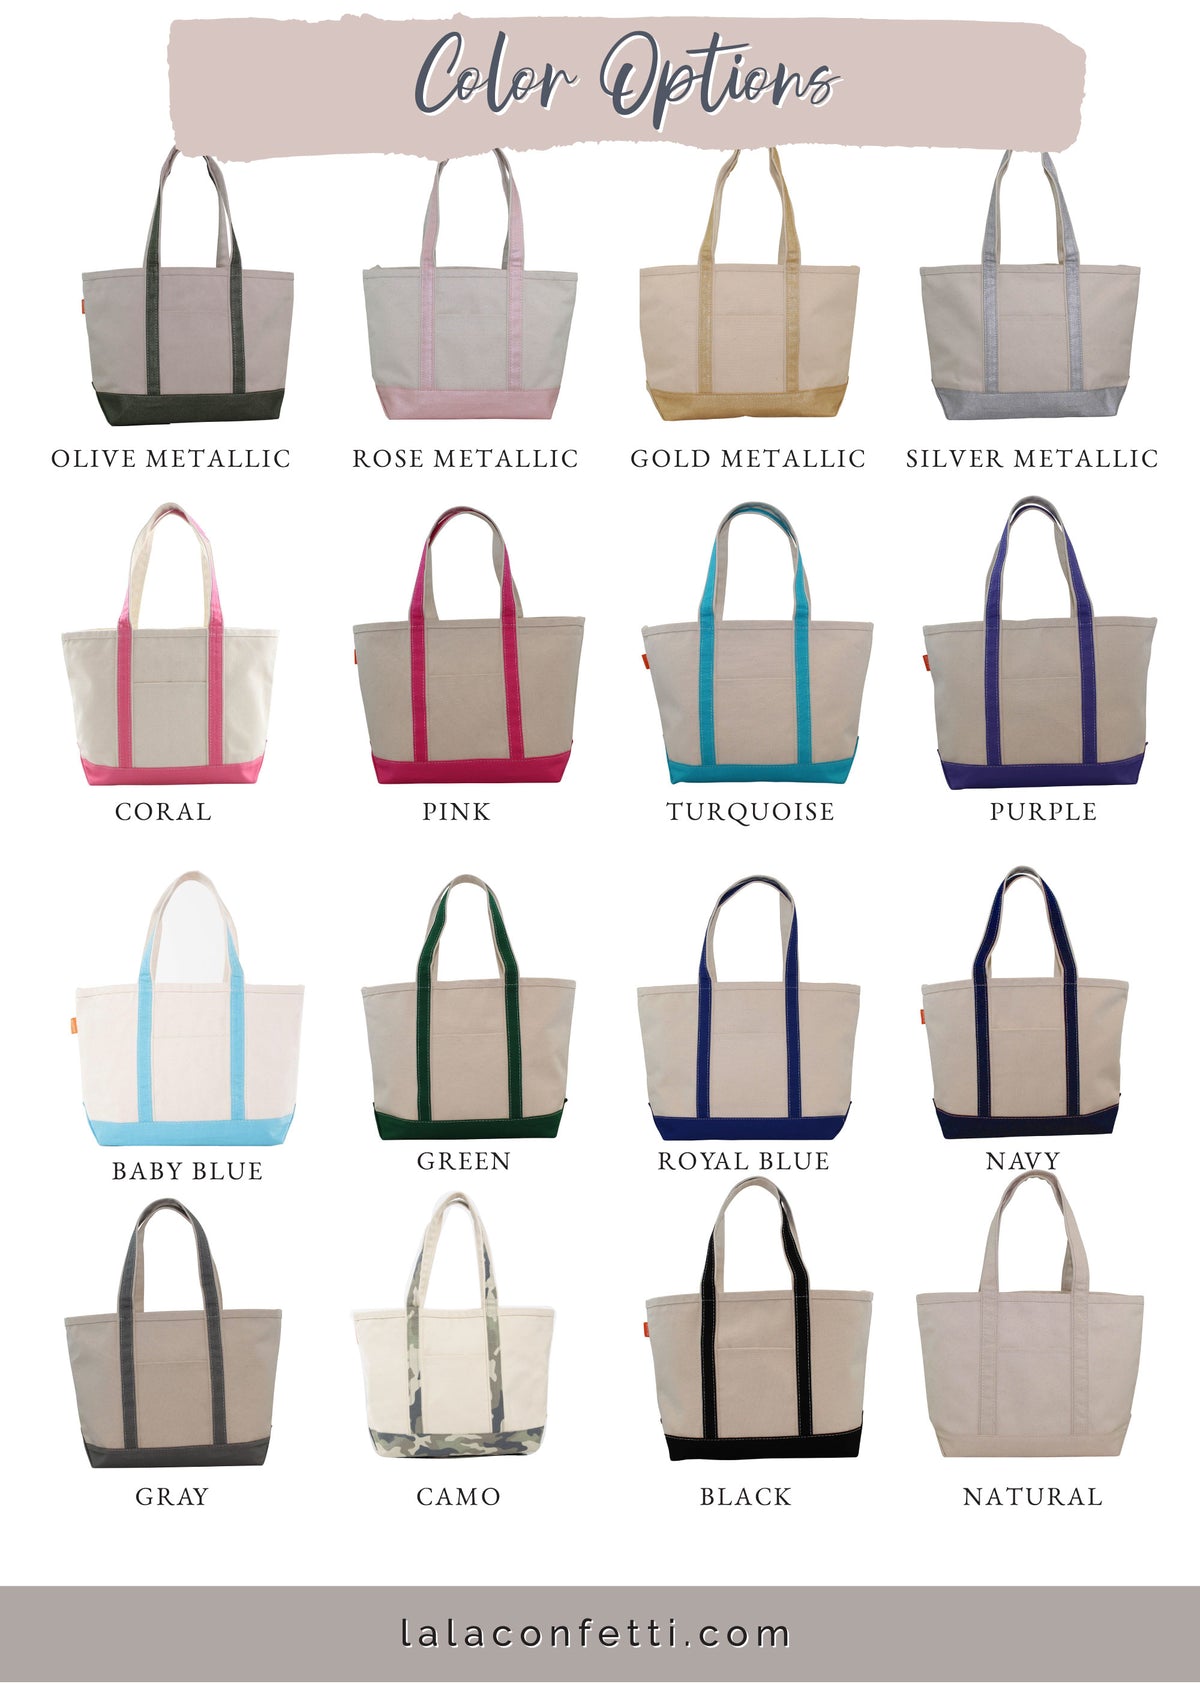 Personalized Tote Bag and Organizer  - On the Go Travel Set